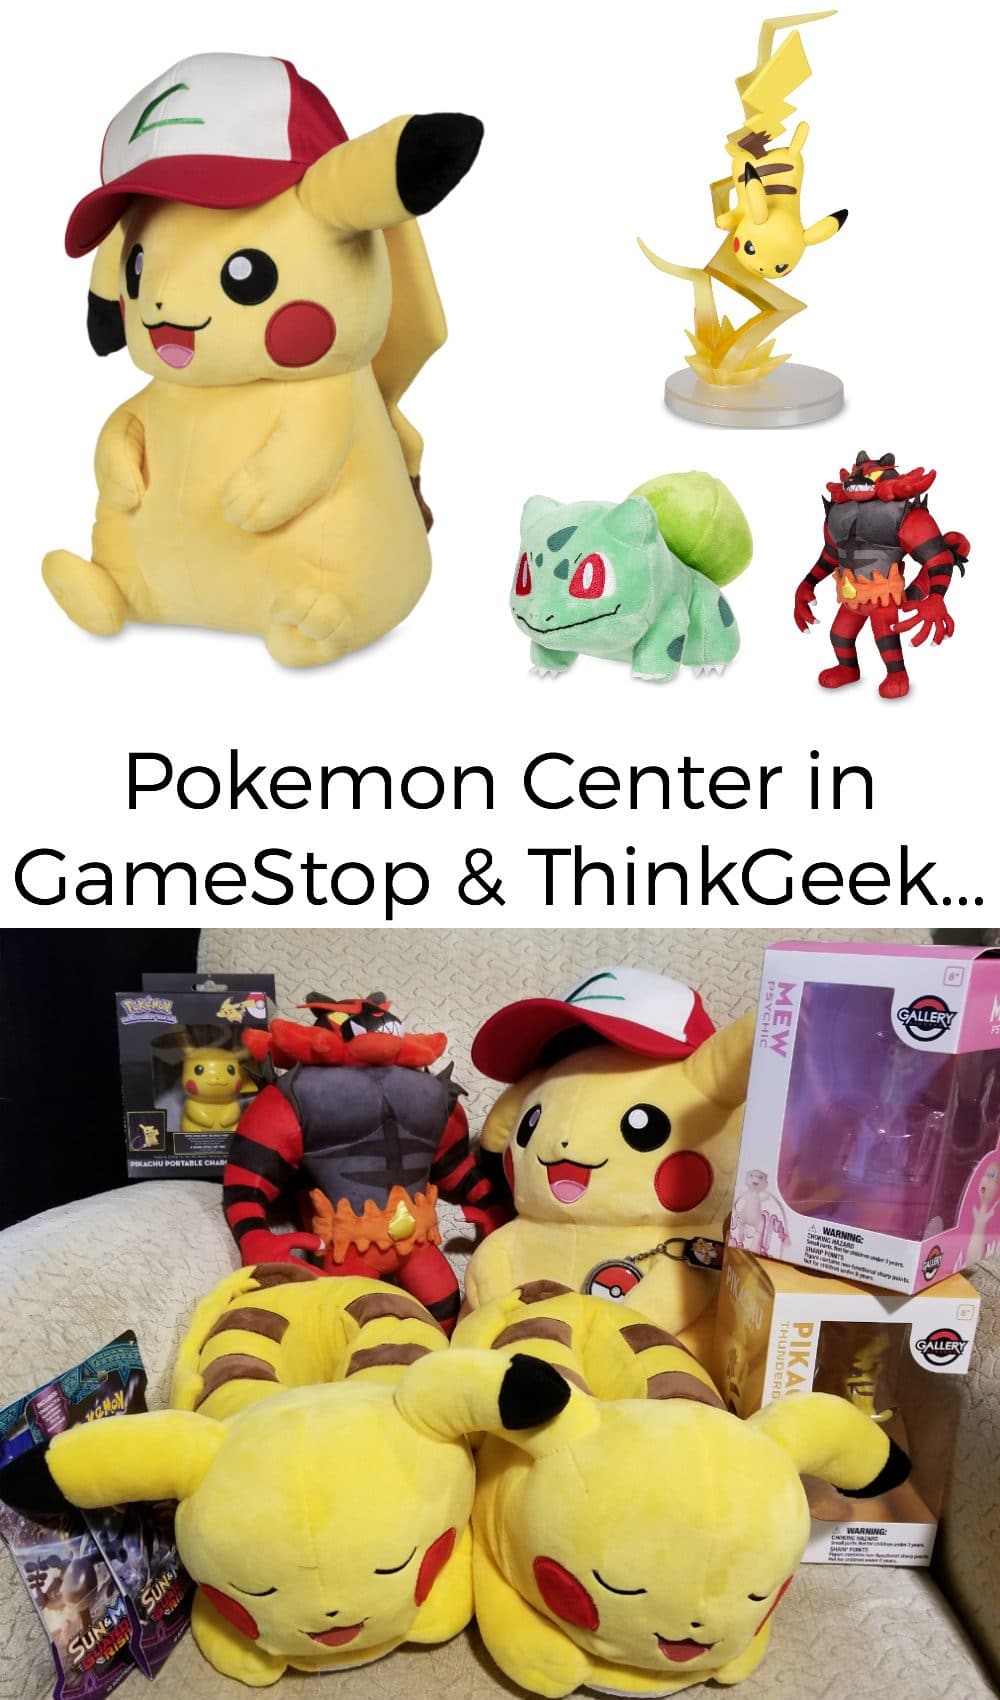 Pokemon Center Locations Now in Gamestop - Giveaway